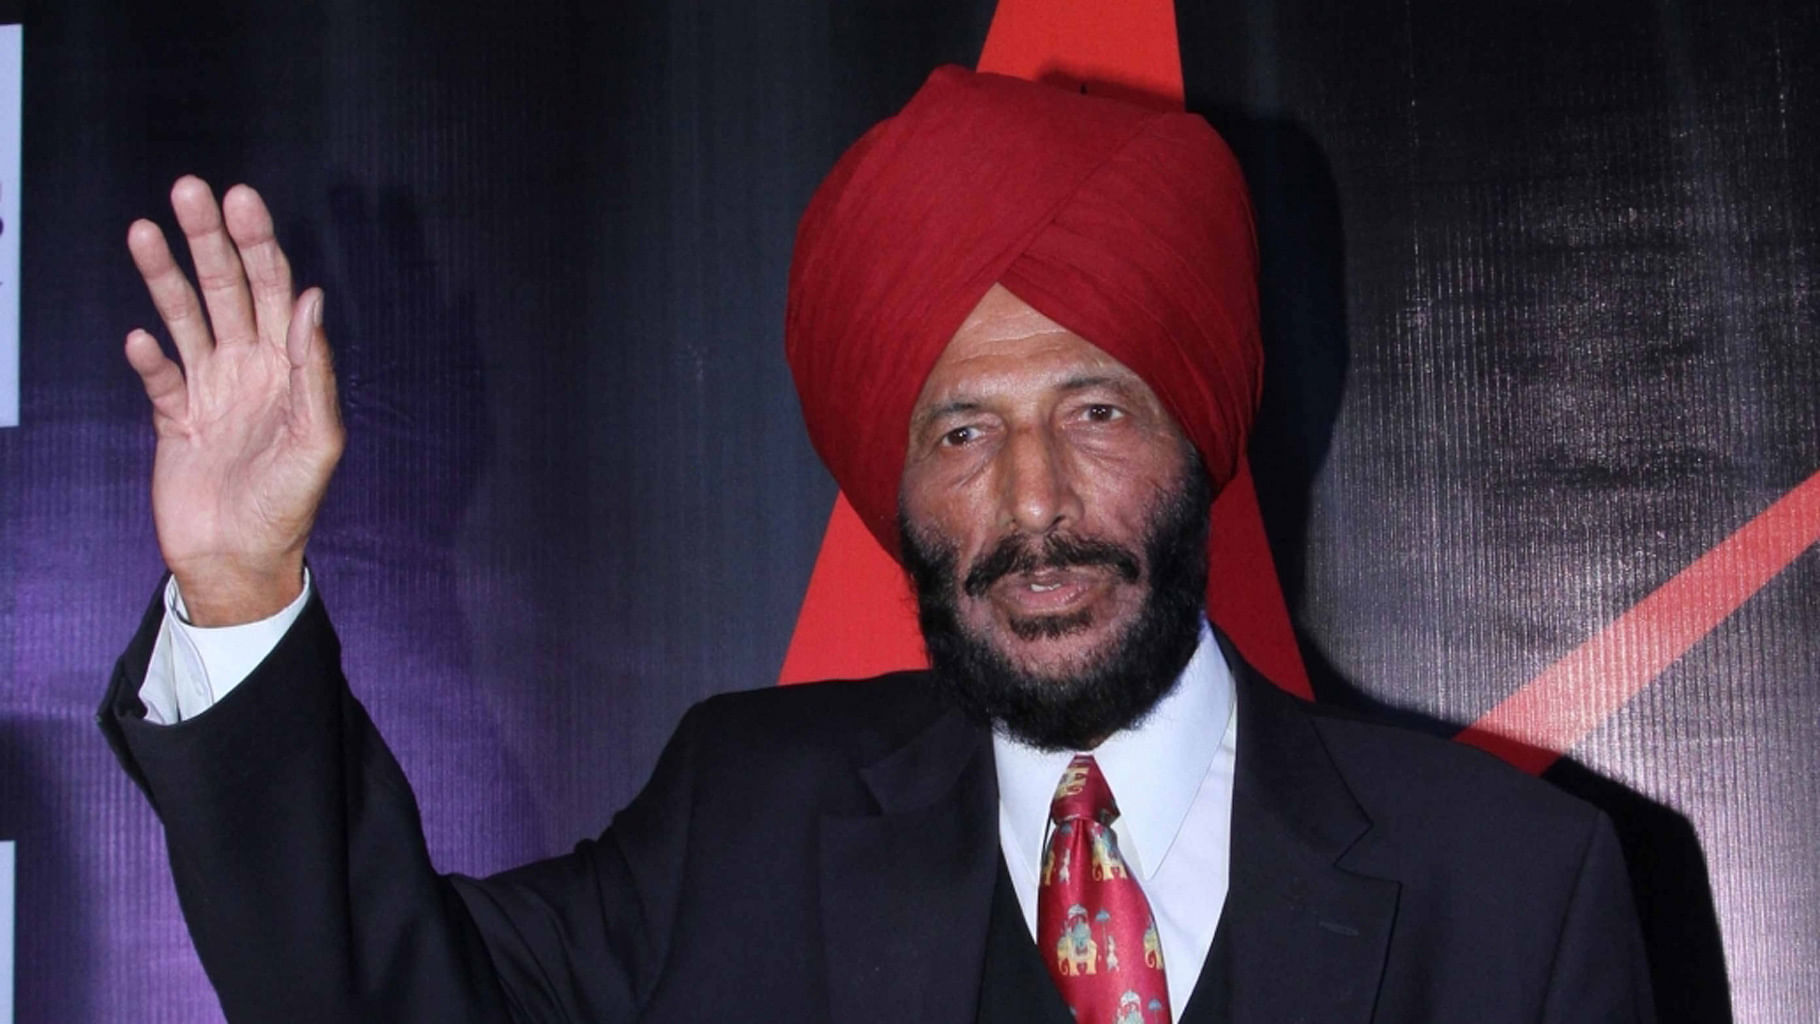 Milkha Singh said he does not see an Indian winning a medal in athletics in the Olympics in the near future.